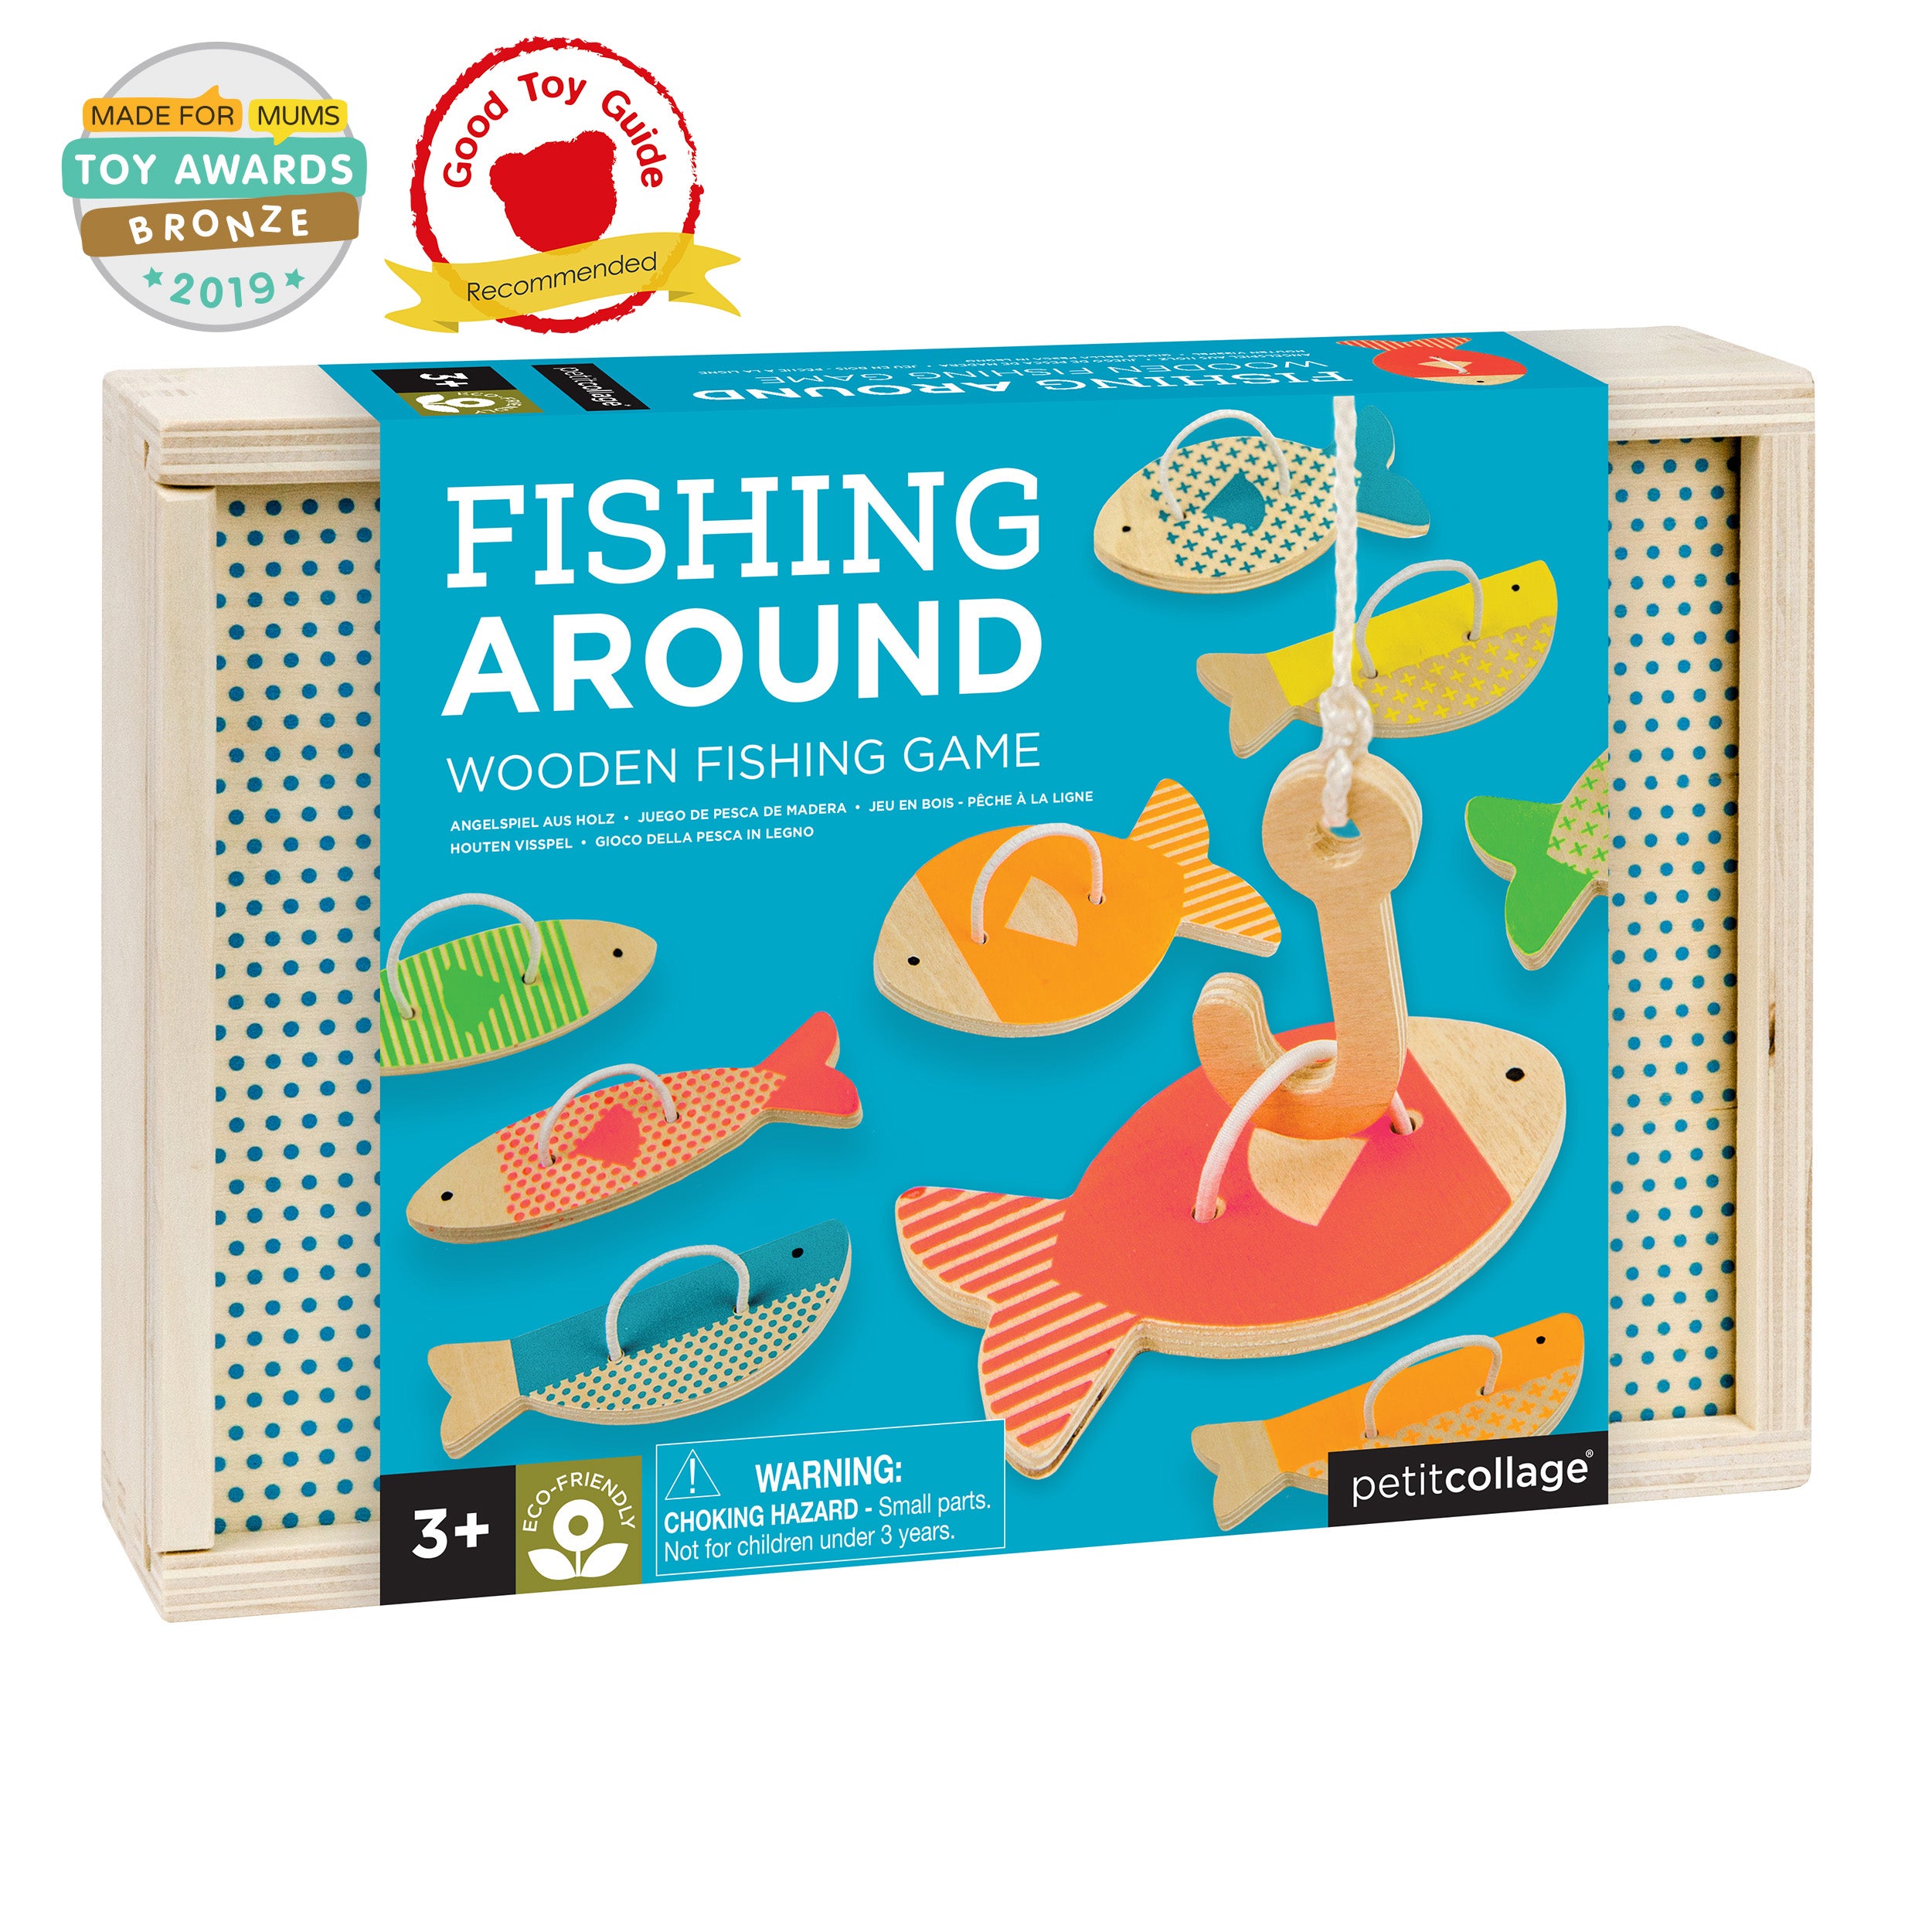 My First Tackle Box Playset, Take a closer look at our plush baby  playsets. This one is perfect for young anglers! Available at